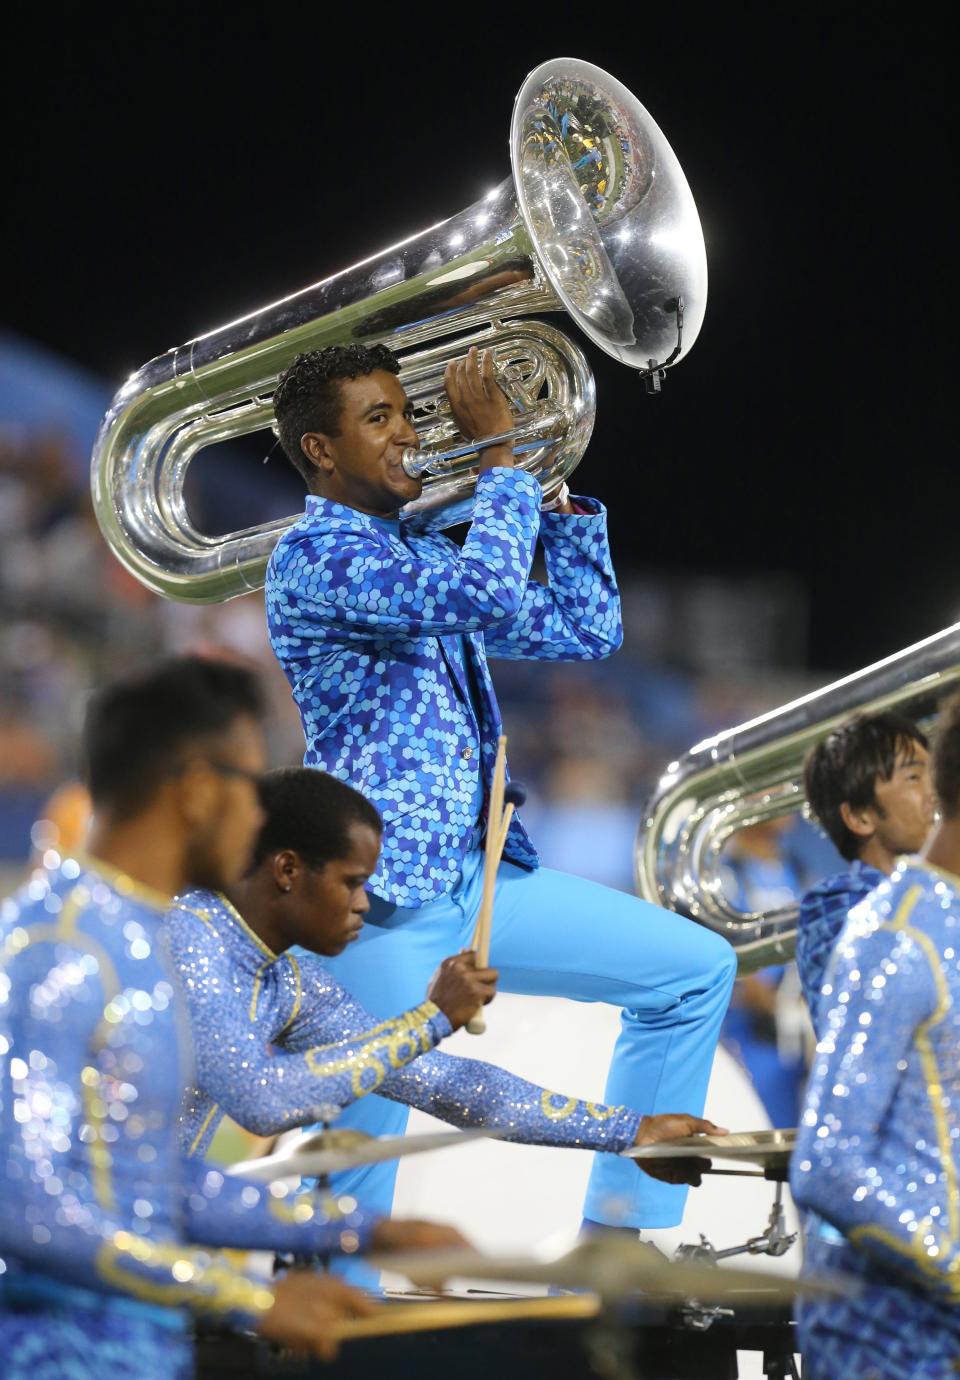 The Bluecoats perform at halftime Pro Football Hall of Fame Game at Tom Benson Hall of Fame Stadium in Canton on Thursday, August 1, 2019.